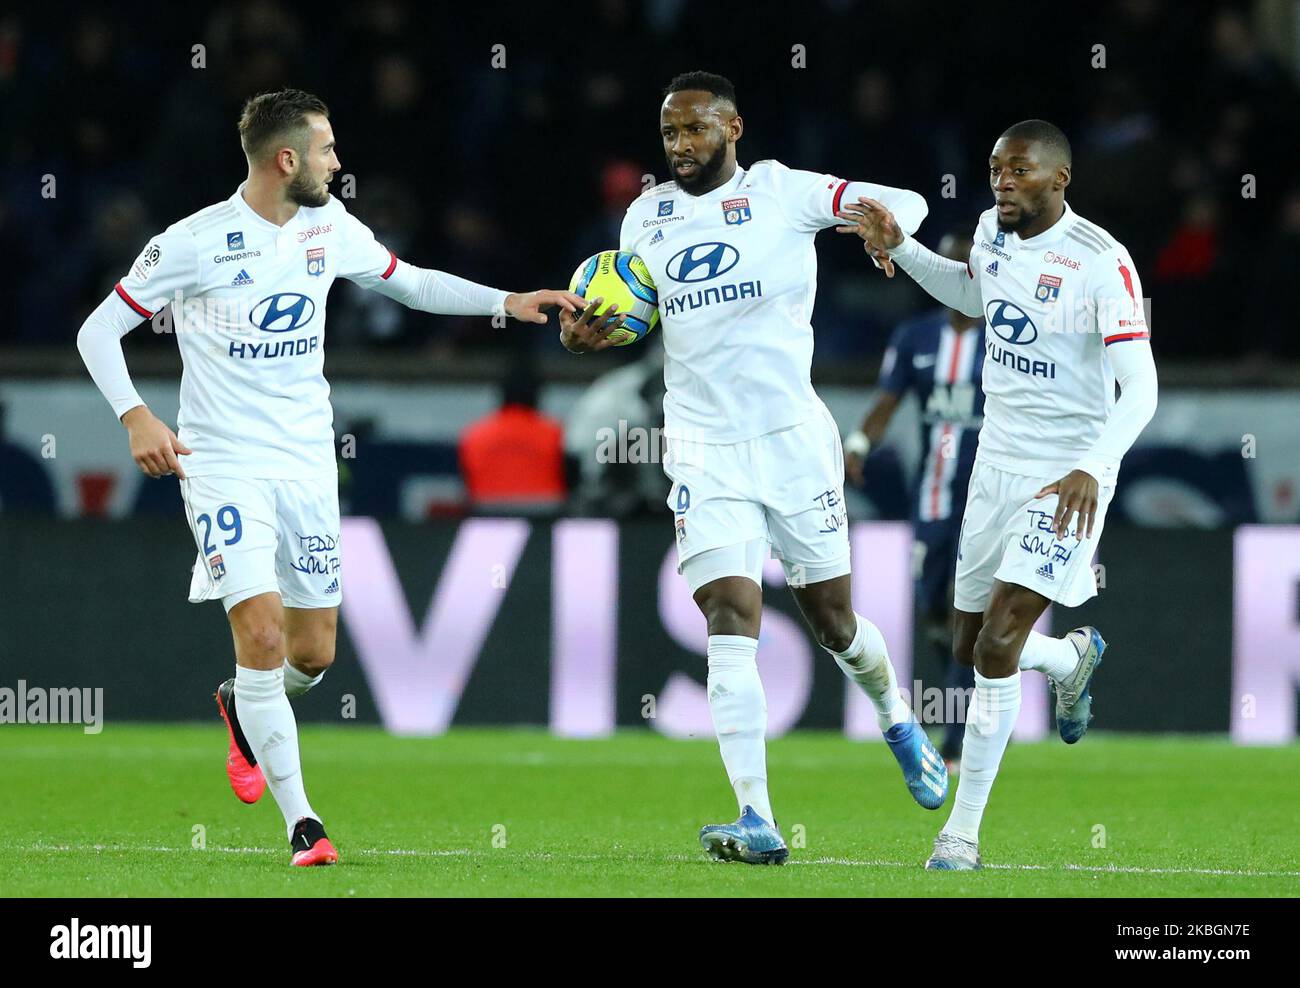 Moussa Dembele of OL celebrates with Karl Toko Ekambi and Lucas Tousart after scoring the goal of 2-3 during the football Ligue 1 Conforama match Paris Saint-Germain v Olympique Lyonnais at the Parc des Princes in Paris, France on February 9, 2020 (Photo by Matteo Ciambelli/NurPhoto) Stock Photo